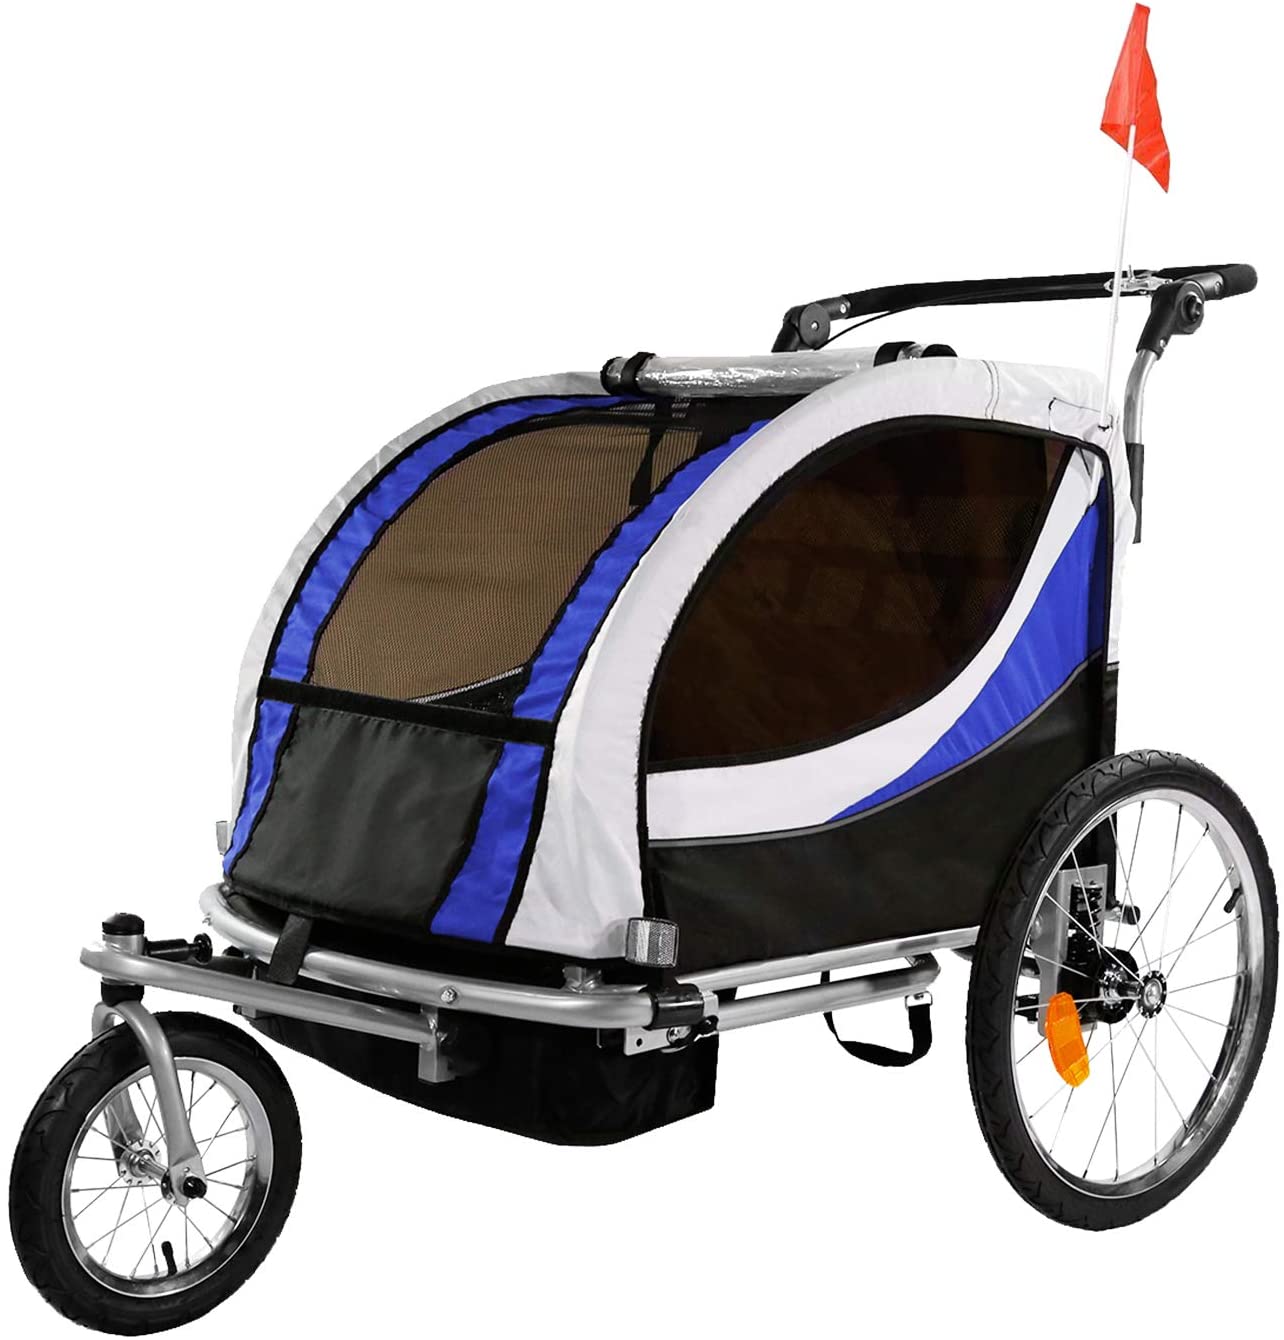 Clevr Deluxe 3 in 1 Double 2 Seat Bicycle